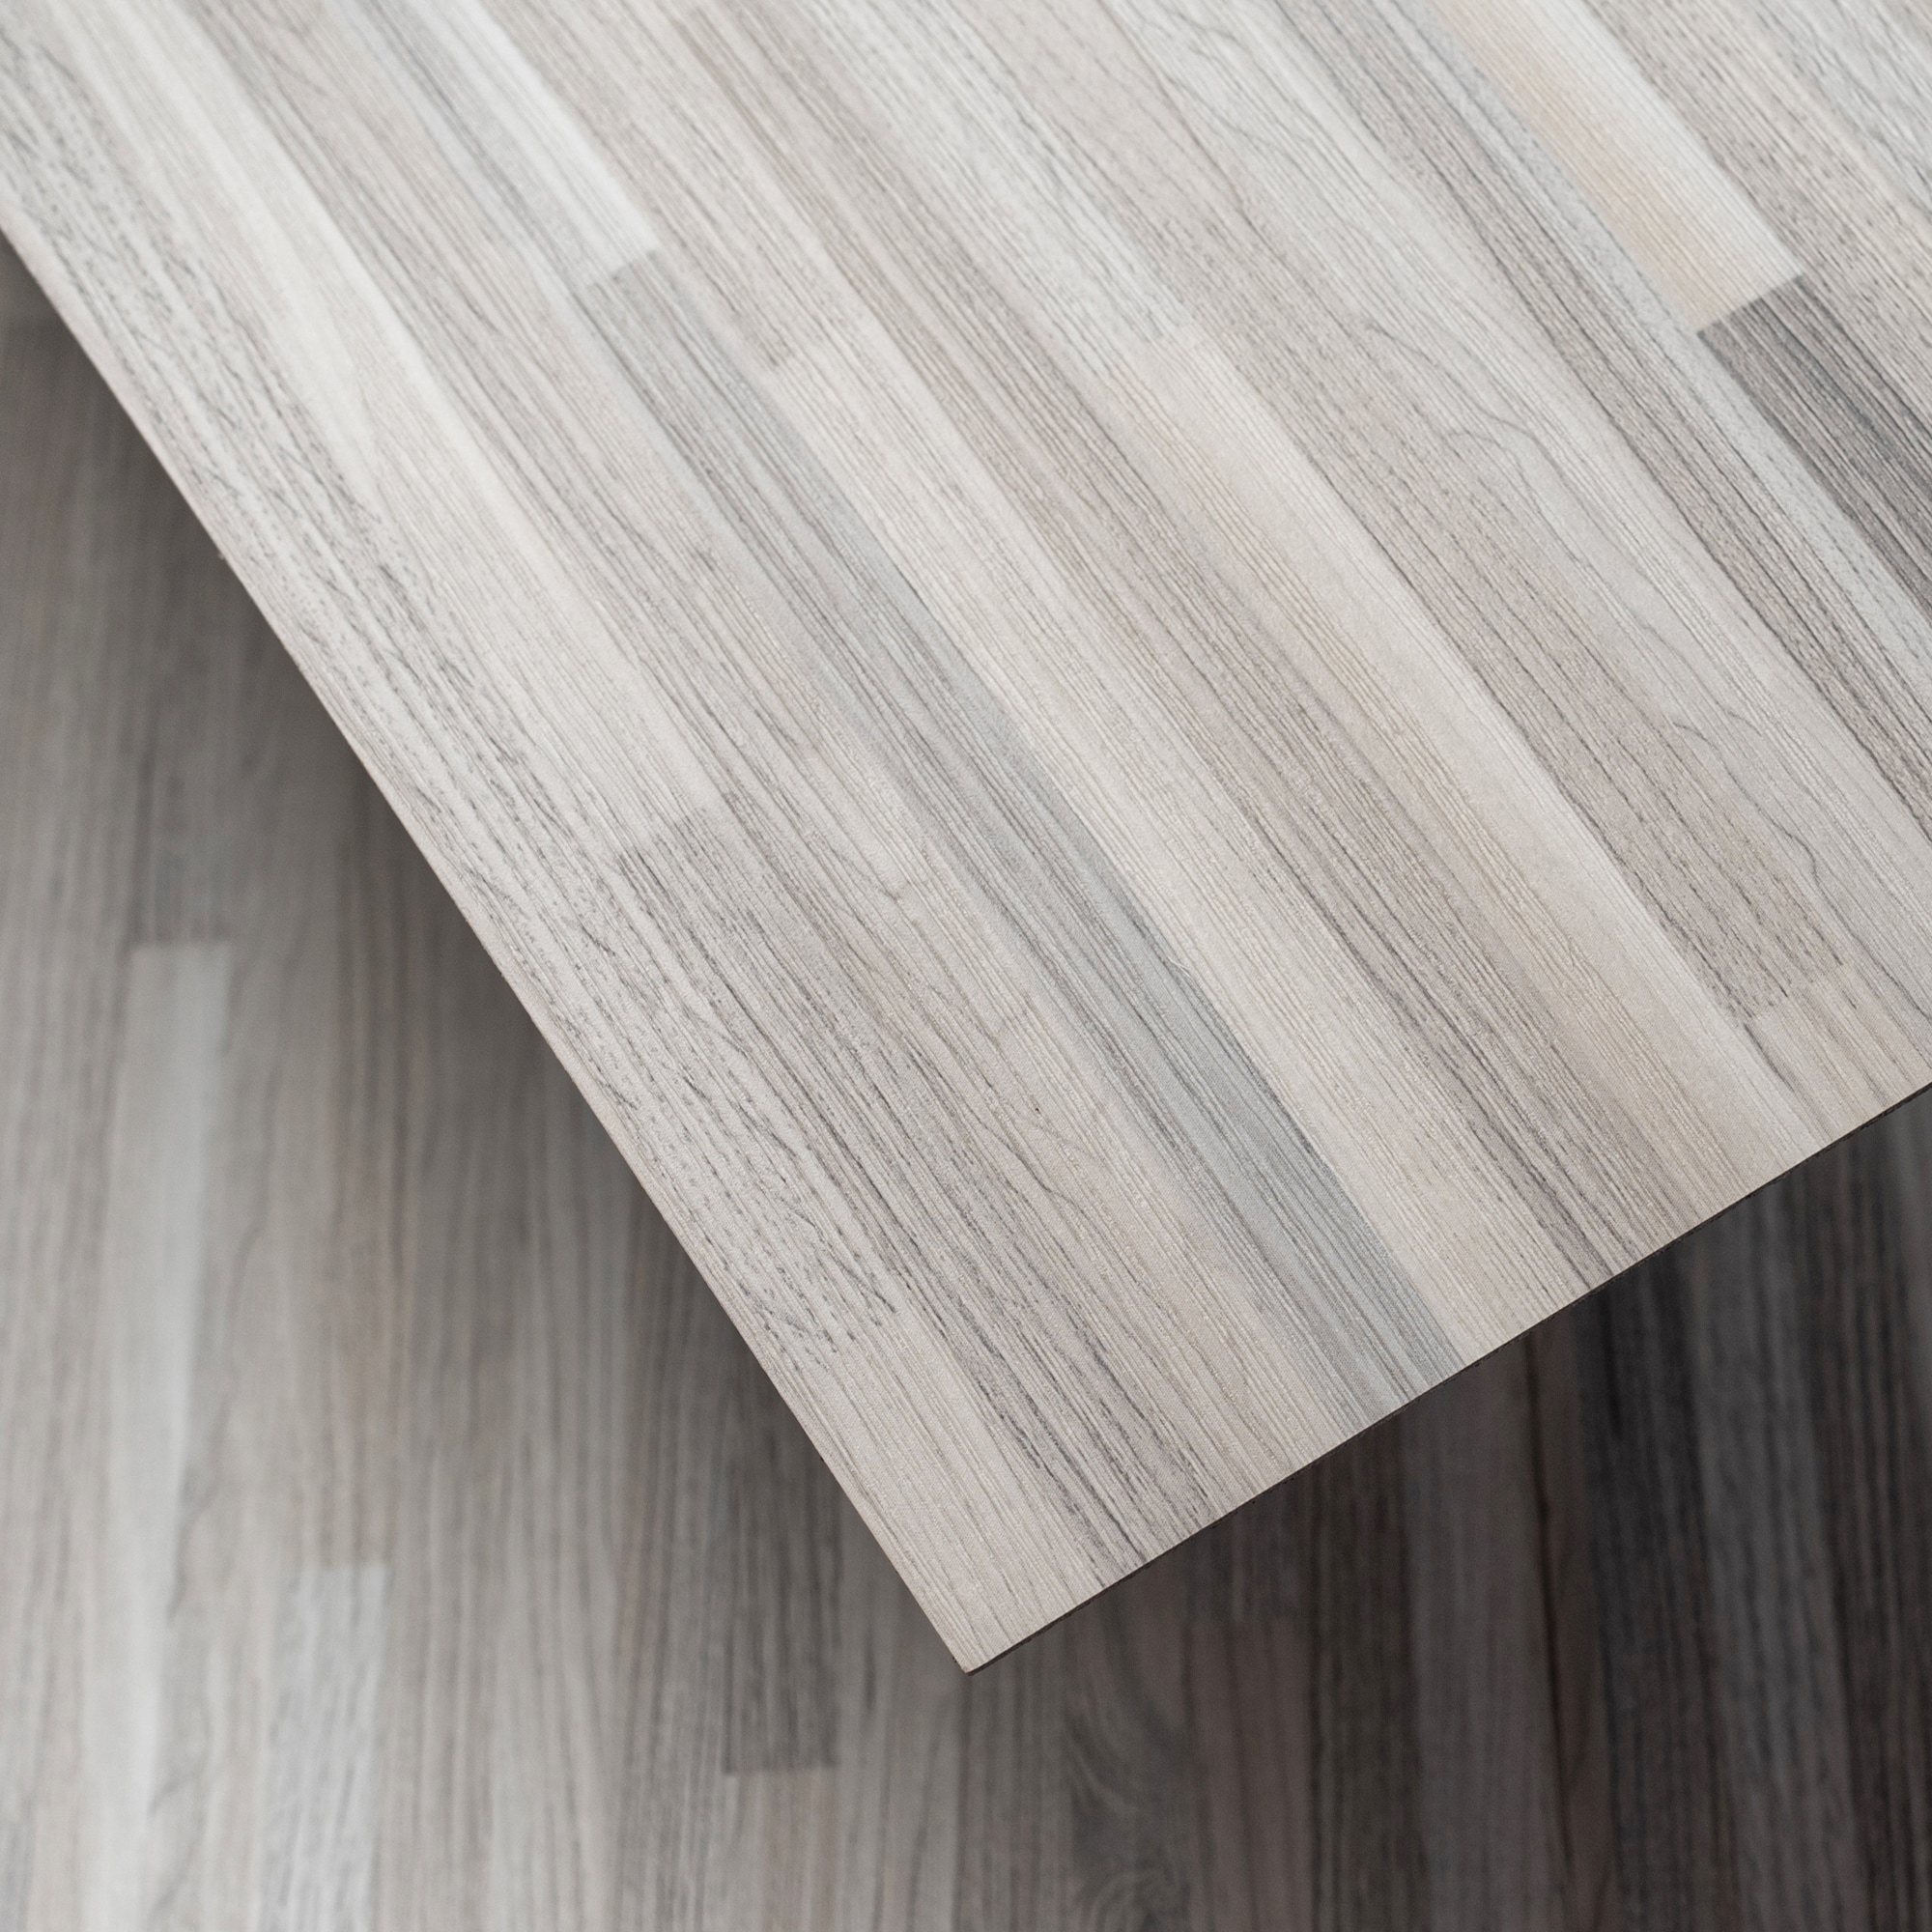 Lucida USA BaseCore Smoked 12 Mil x 6 in. W x 36 in. L Peel and Stick Waterproof Luxury Vinyl Plank Flooring (54 sqft/case)